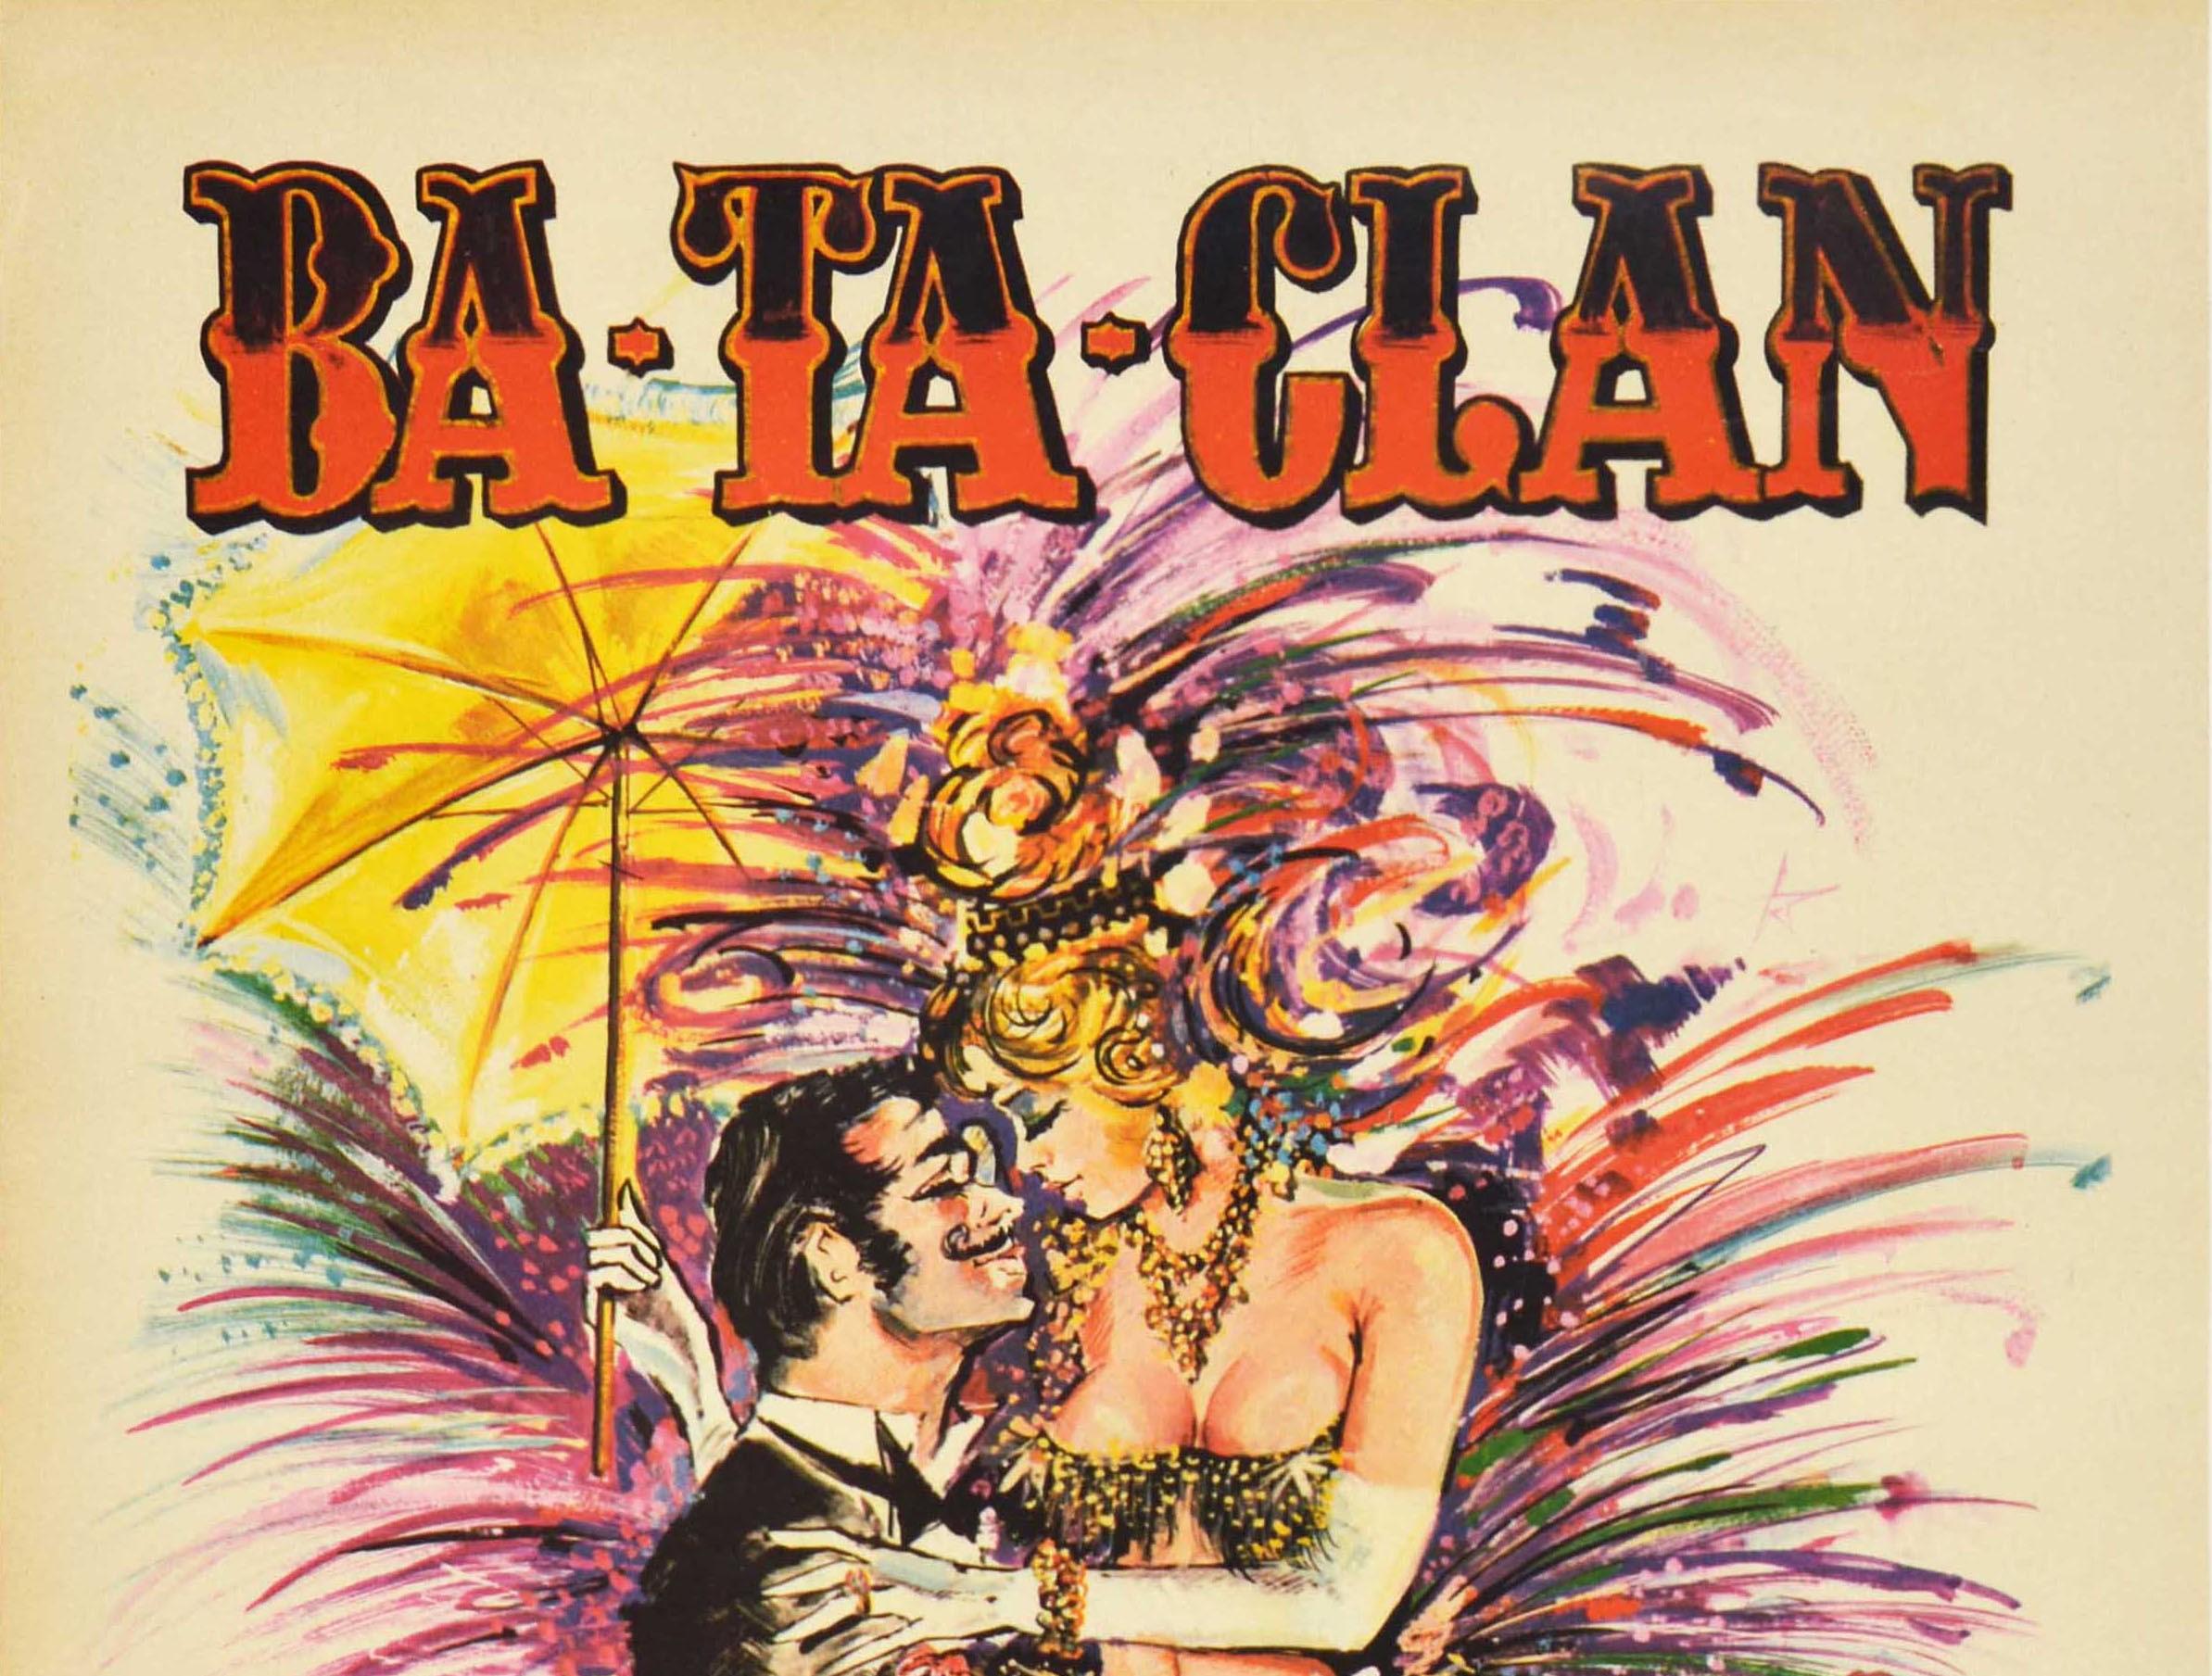 Original vintage advertising poster for a cabaret performance Ba-Ta-Clan at the Music Hall de Paris featuring a man in a suit holding a top hat with his arm around a scantily dressed dancer in a sparkly outfit and jewellery with long white gloves,